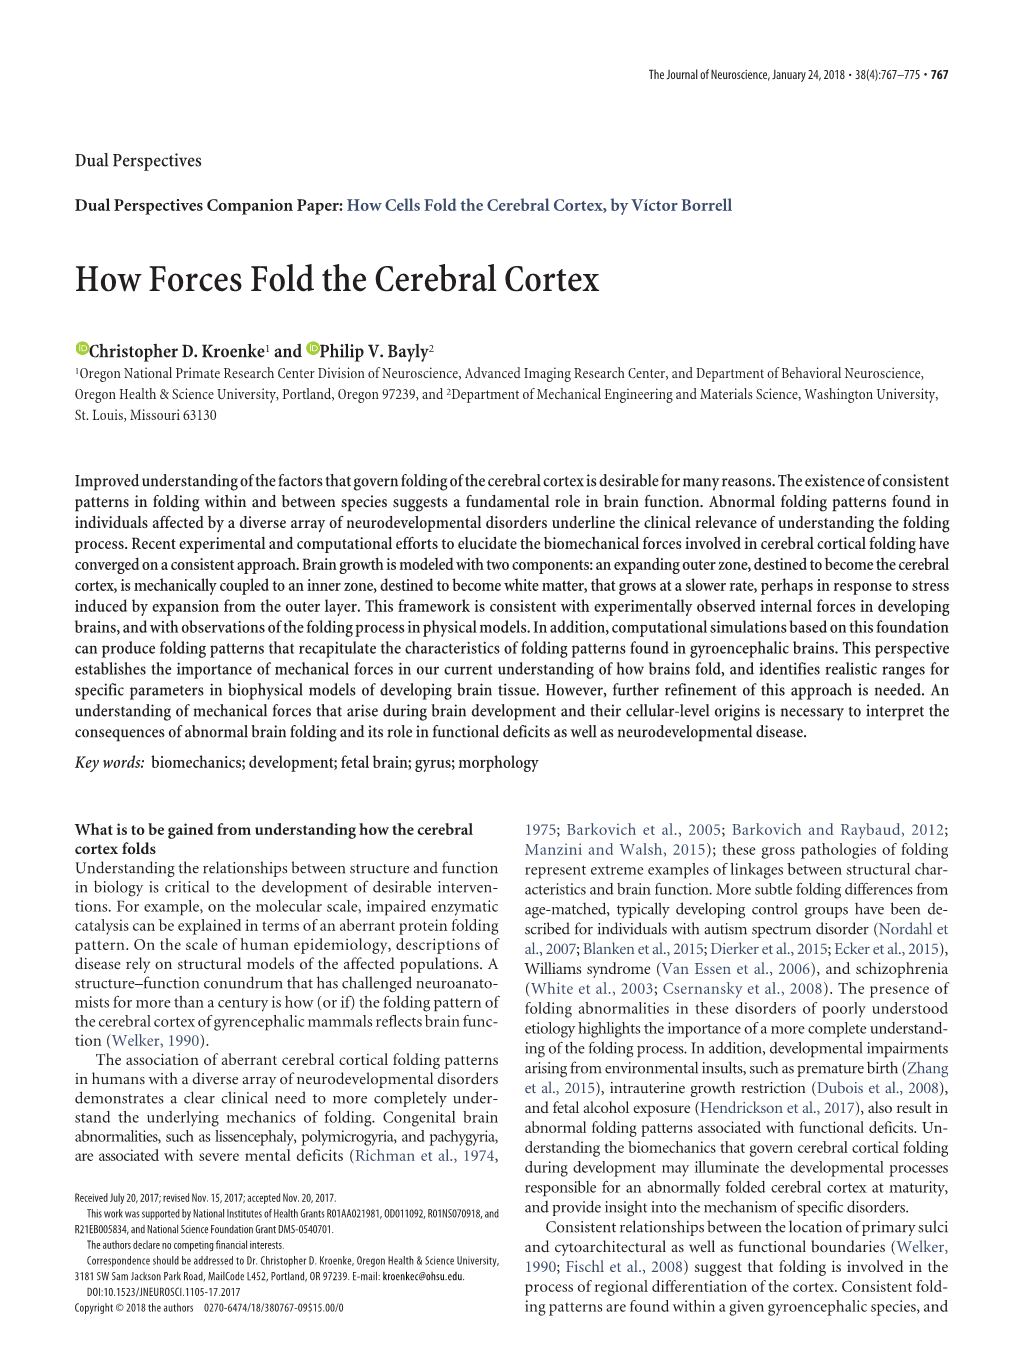 How Forces Fold the Cerebral Cortex